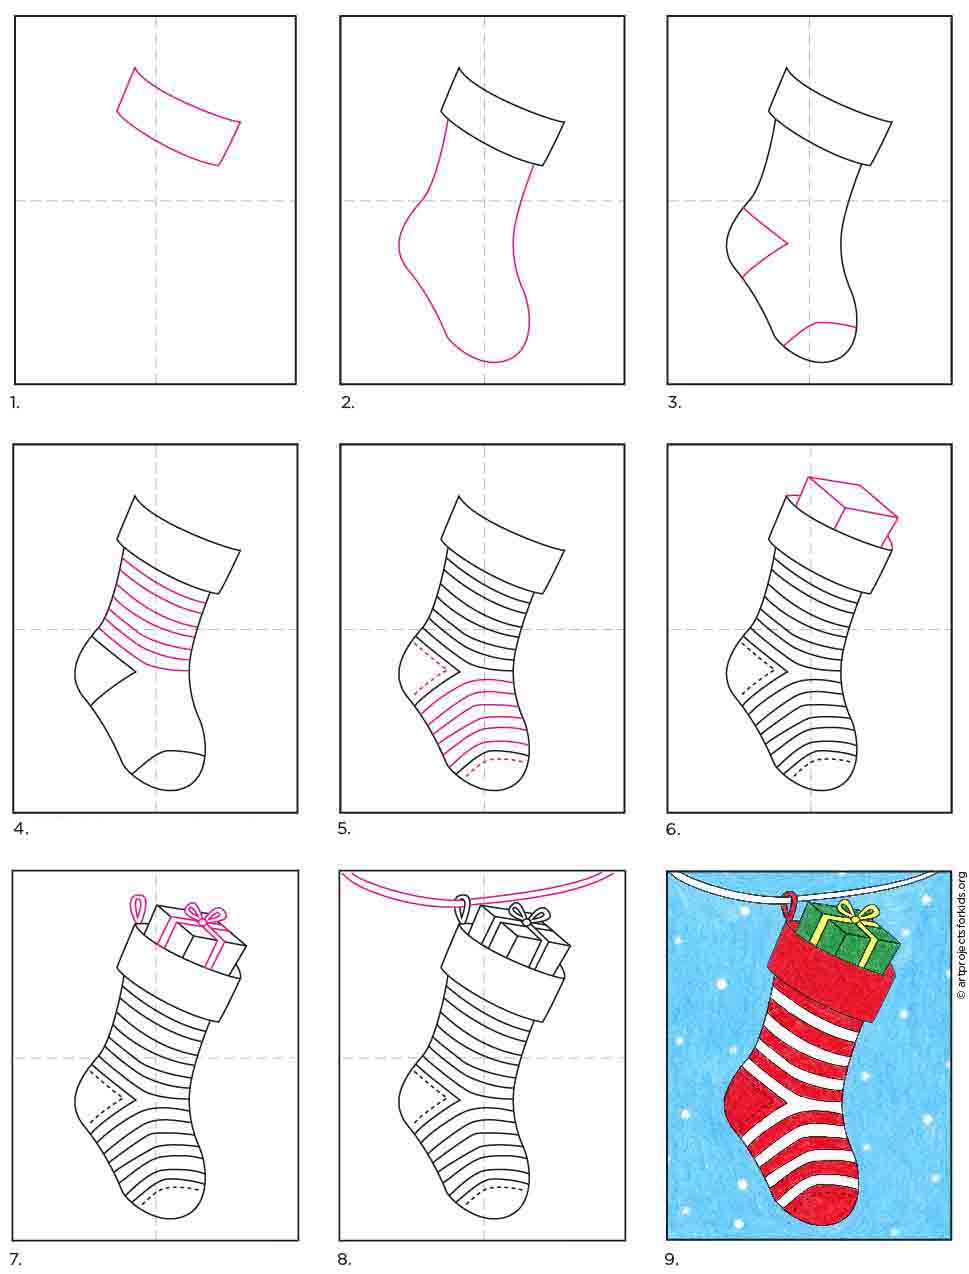 Easy How to Draw a Stocking Tutorial and Stocking Coloring Page